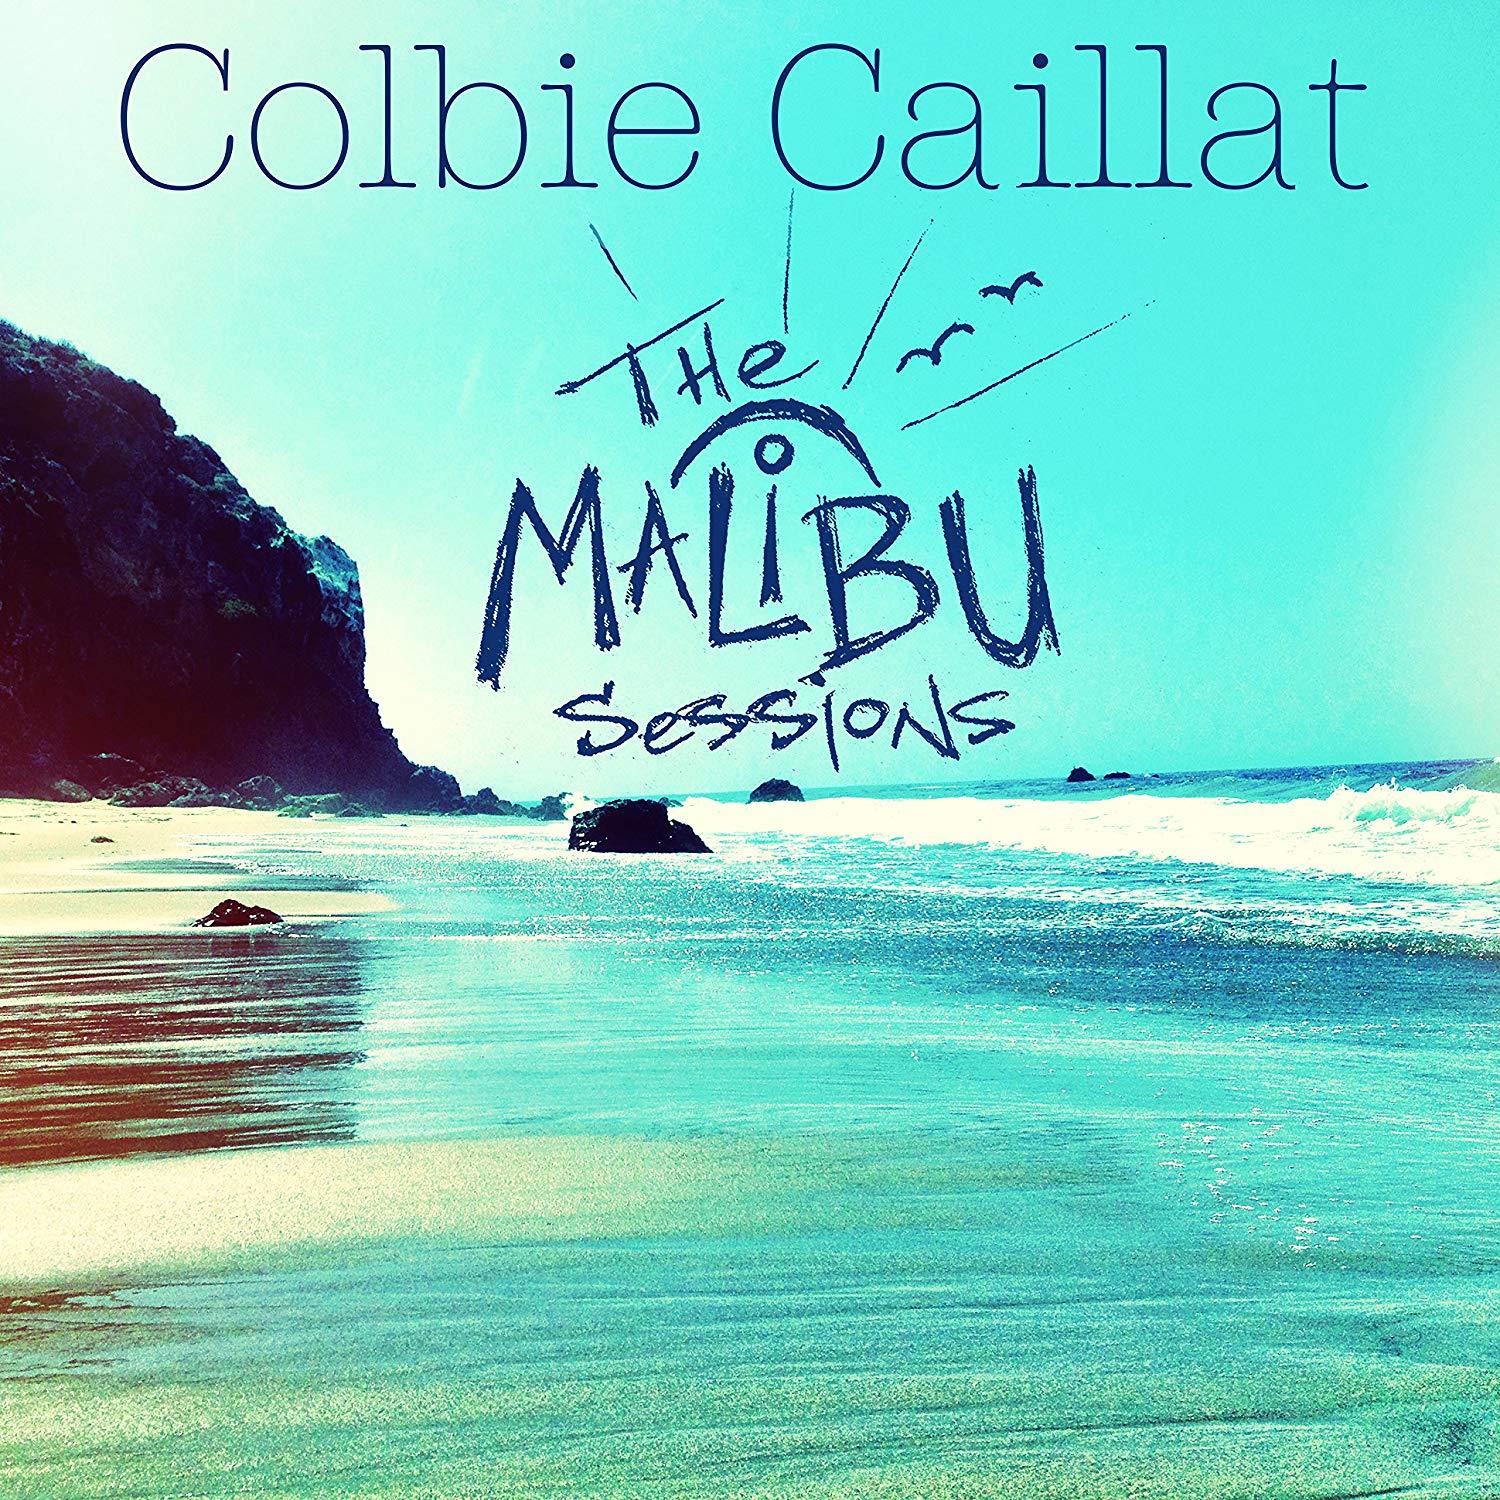 The Malibu Sessions / Colbie Caillat